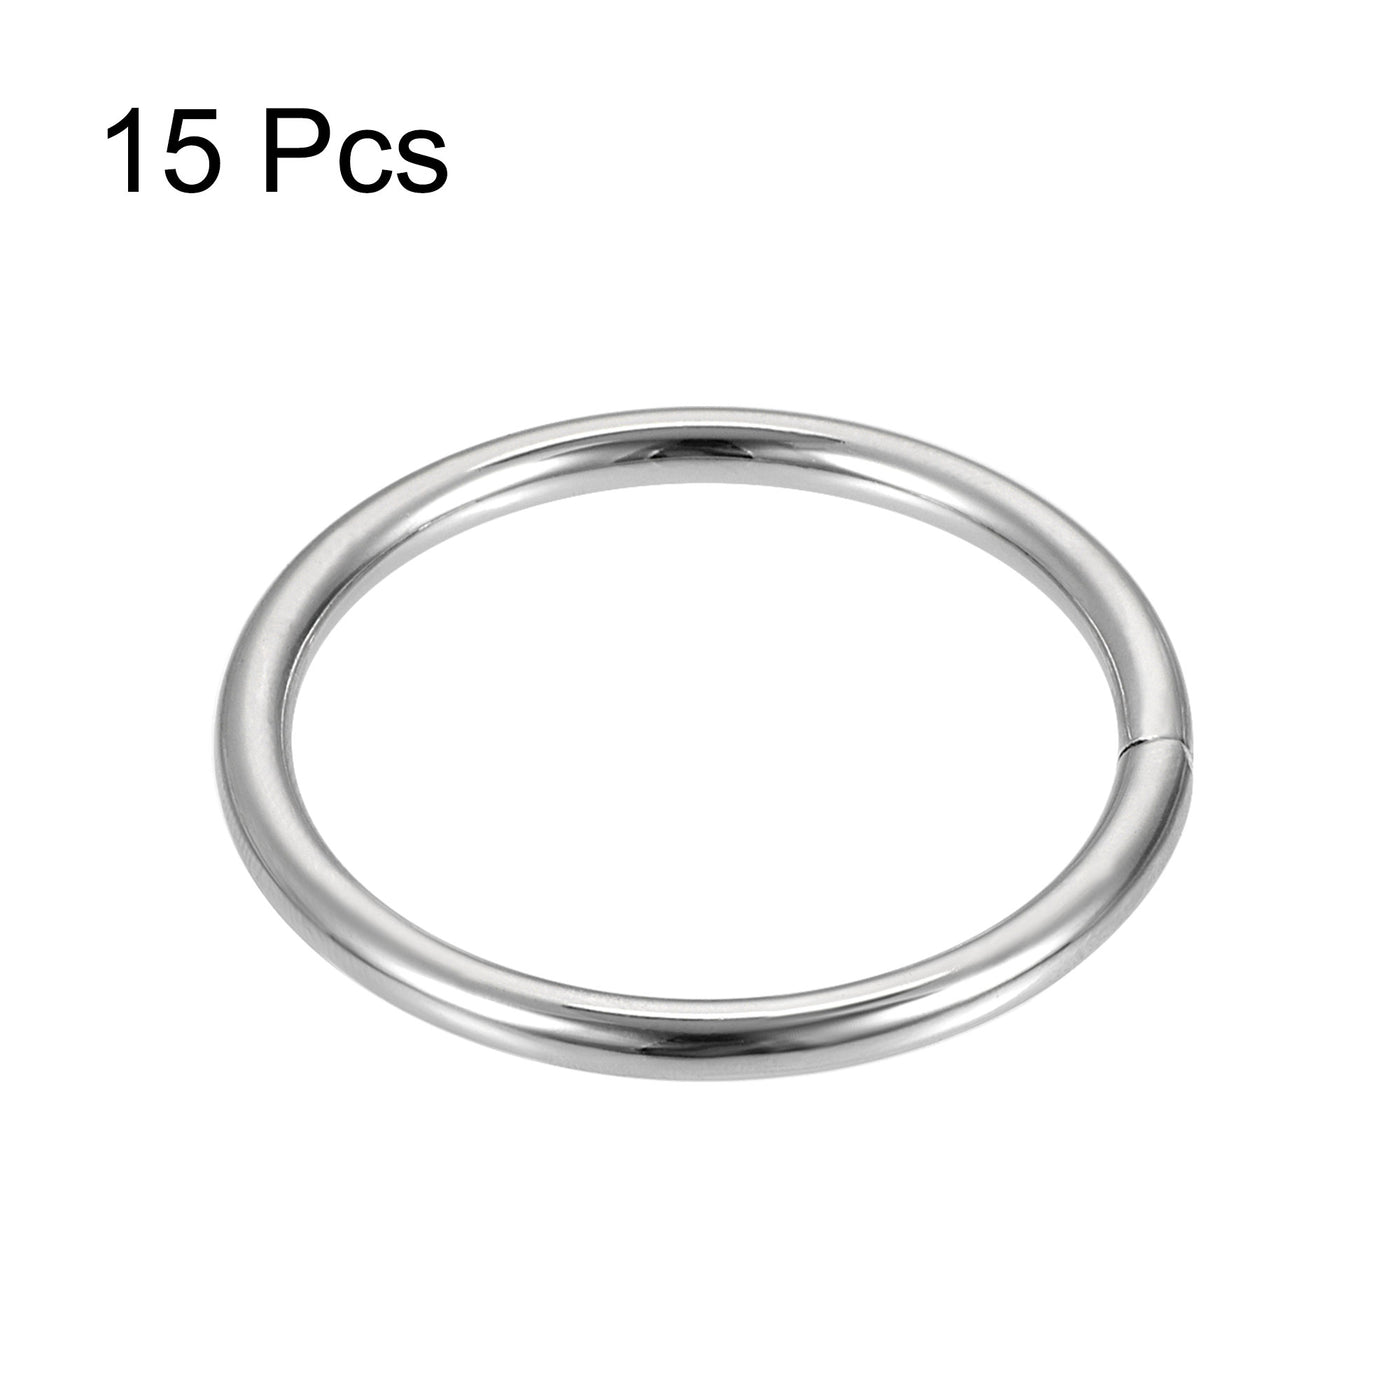 uxcell Uxcell Metal O Ring 38mm(1.5") ID 3.8mm Thickness Non-Welded Rings Silver Tone 15pcs